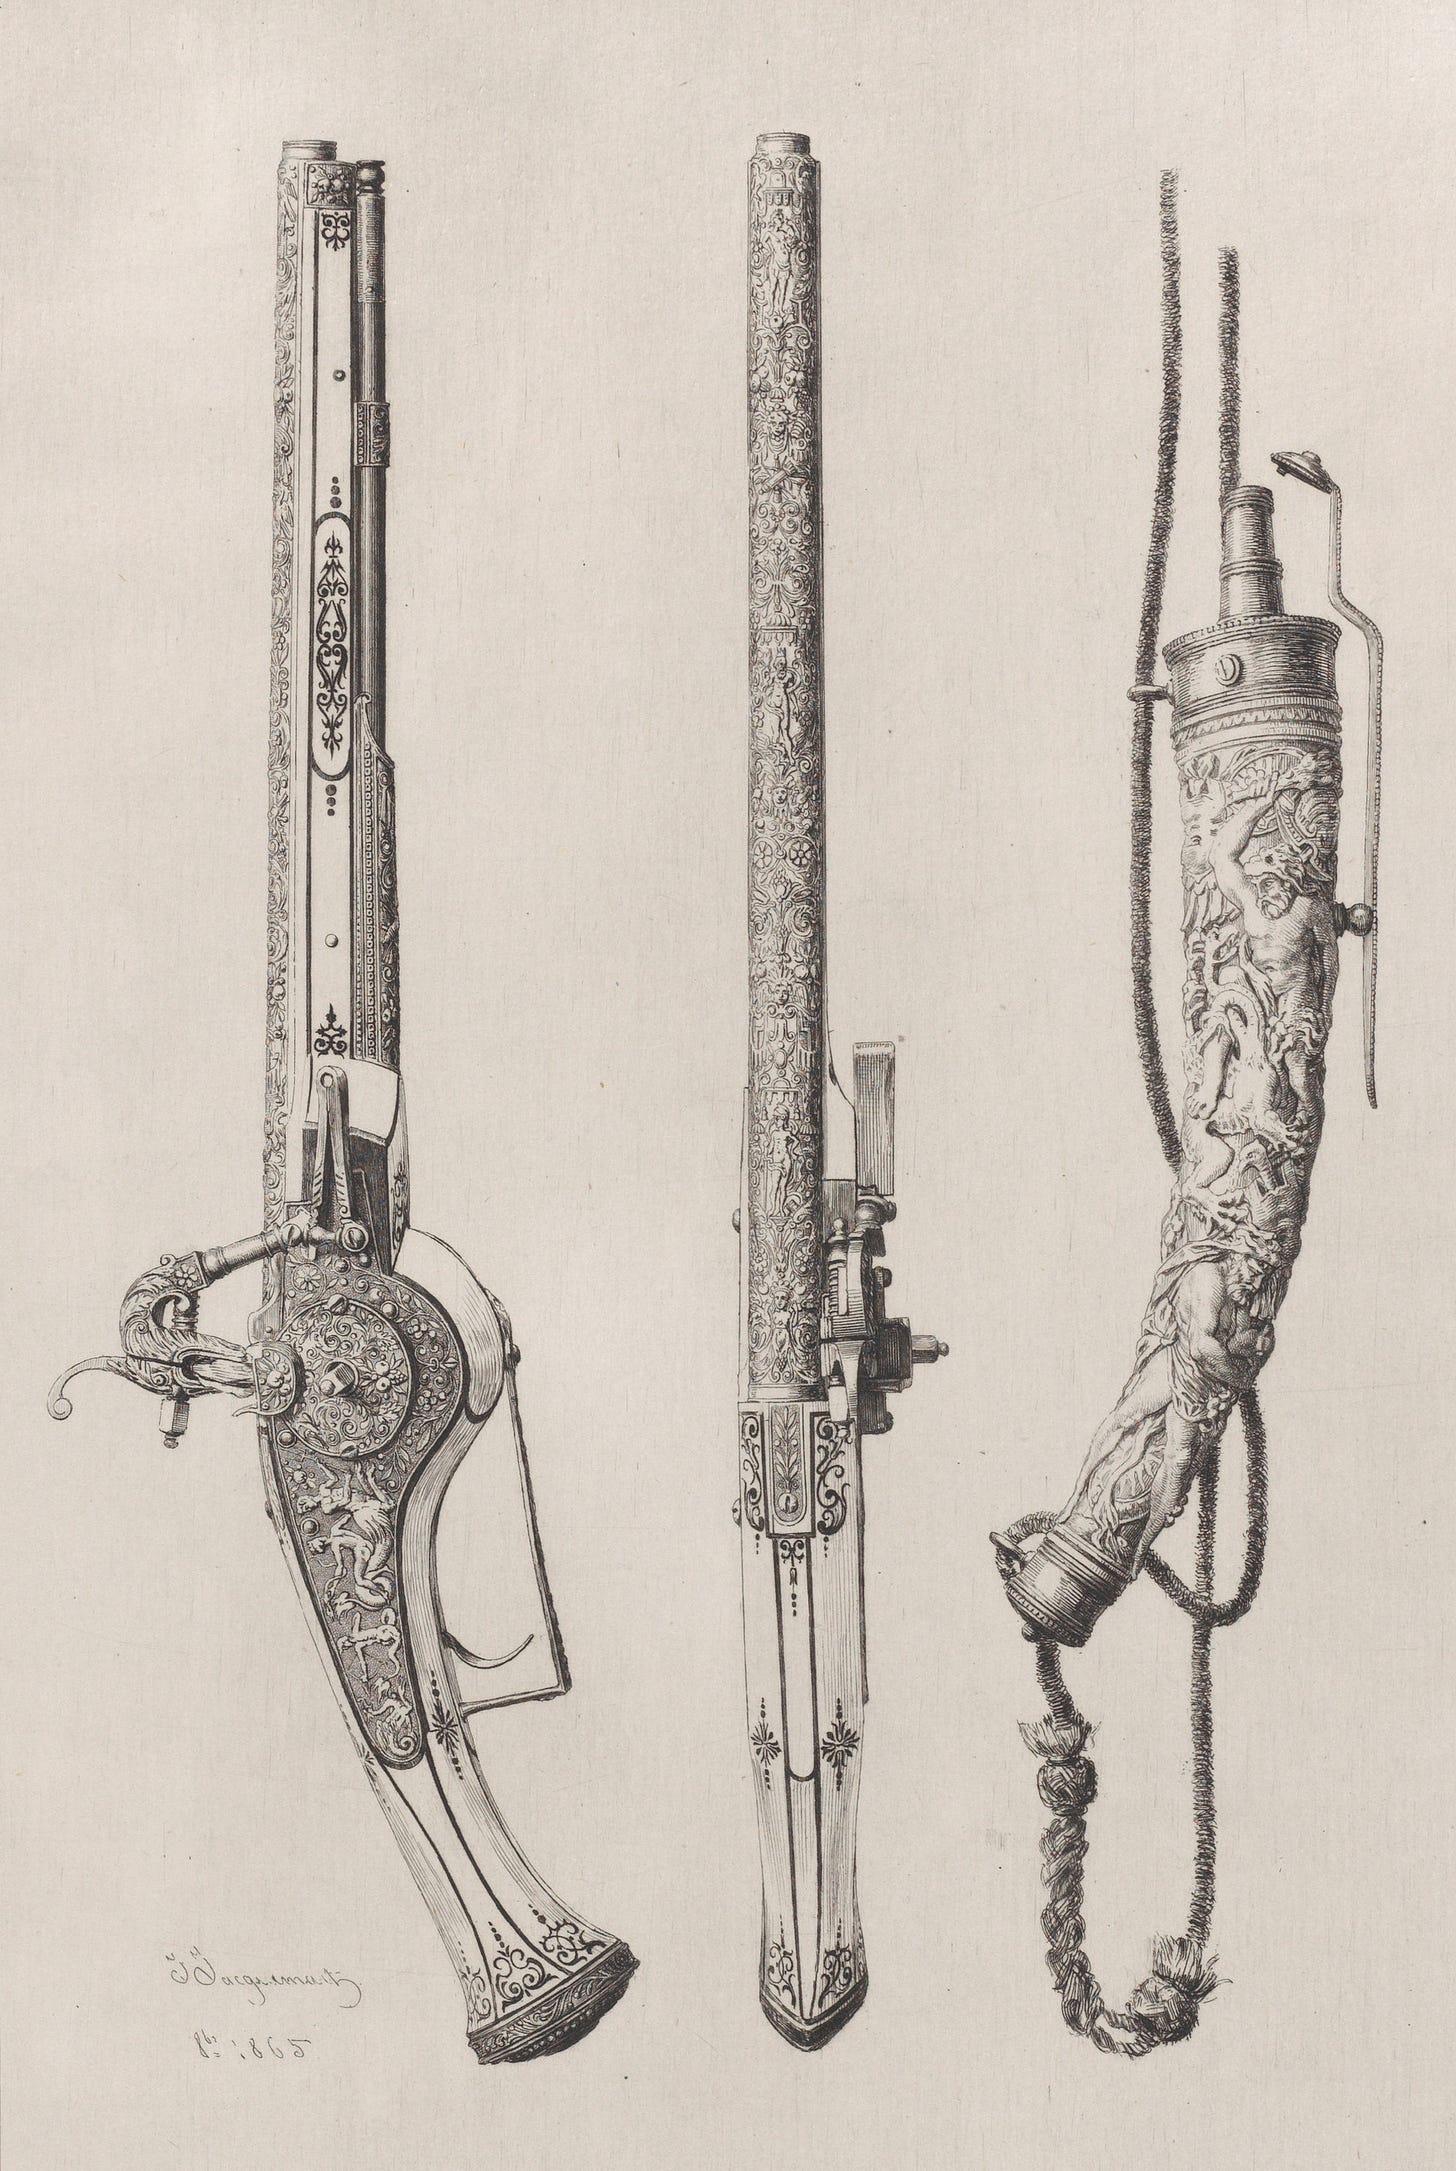 Black and white sketch of an ornate pistol, side view and top down, and a powder bag.